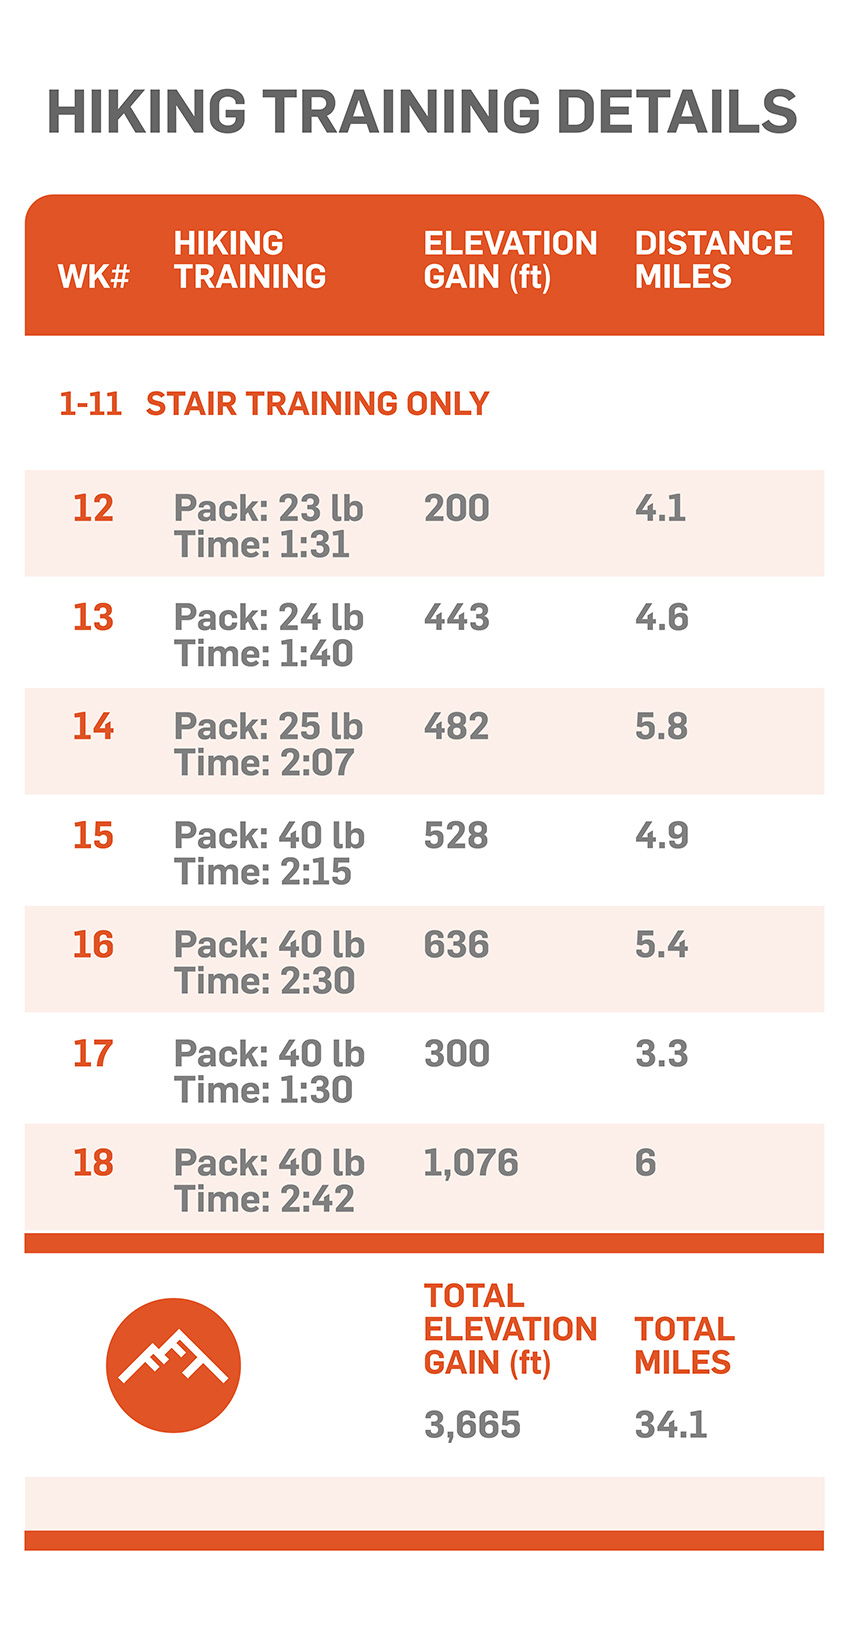 Hiking training details for your backpack training plan